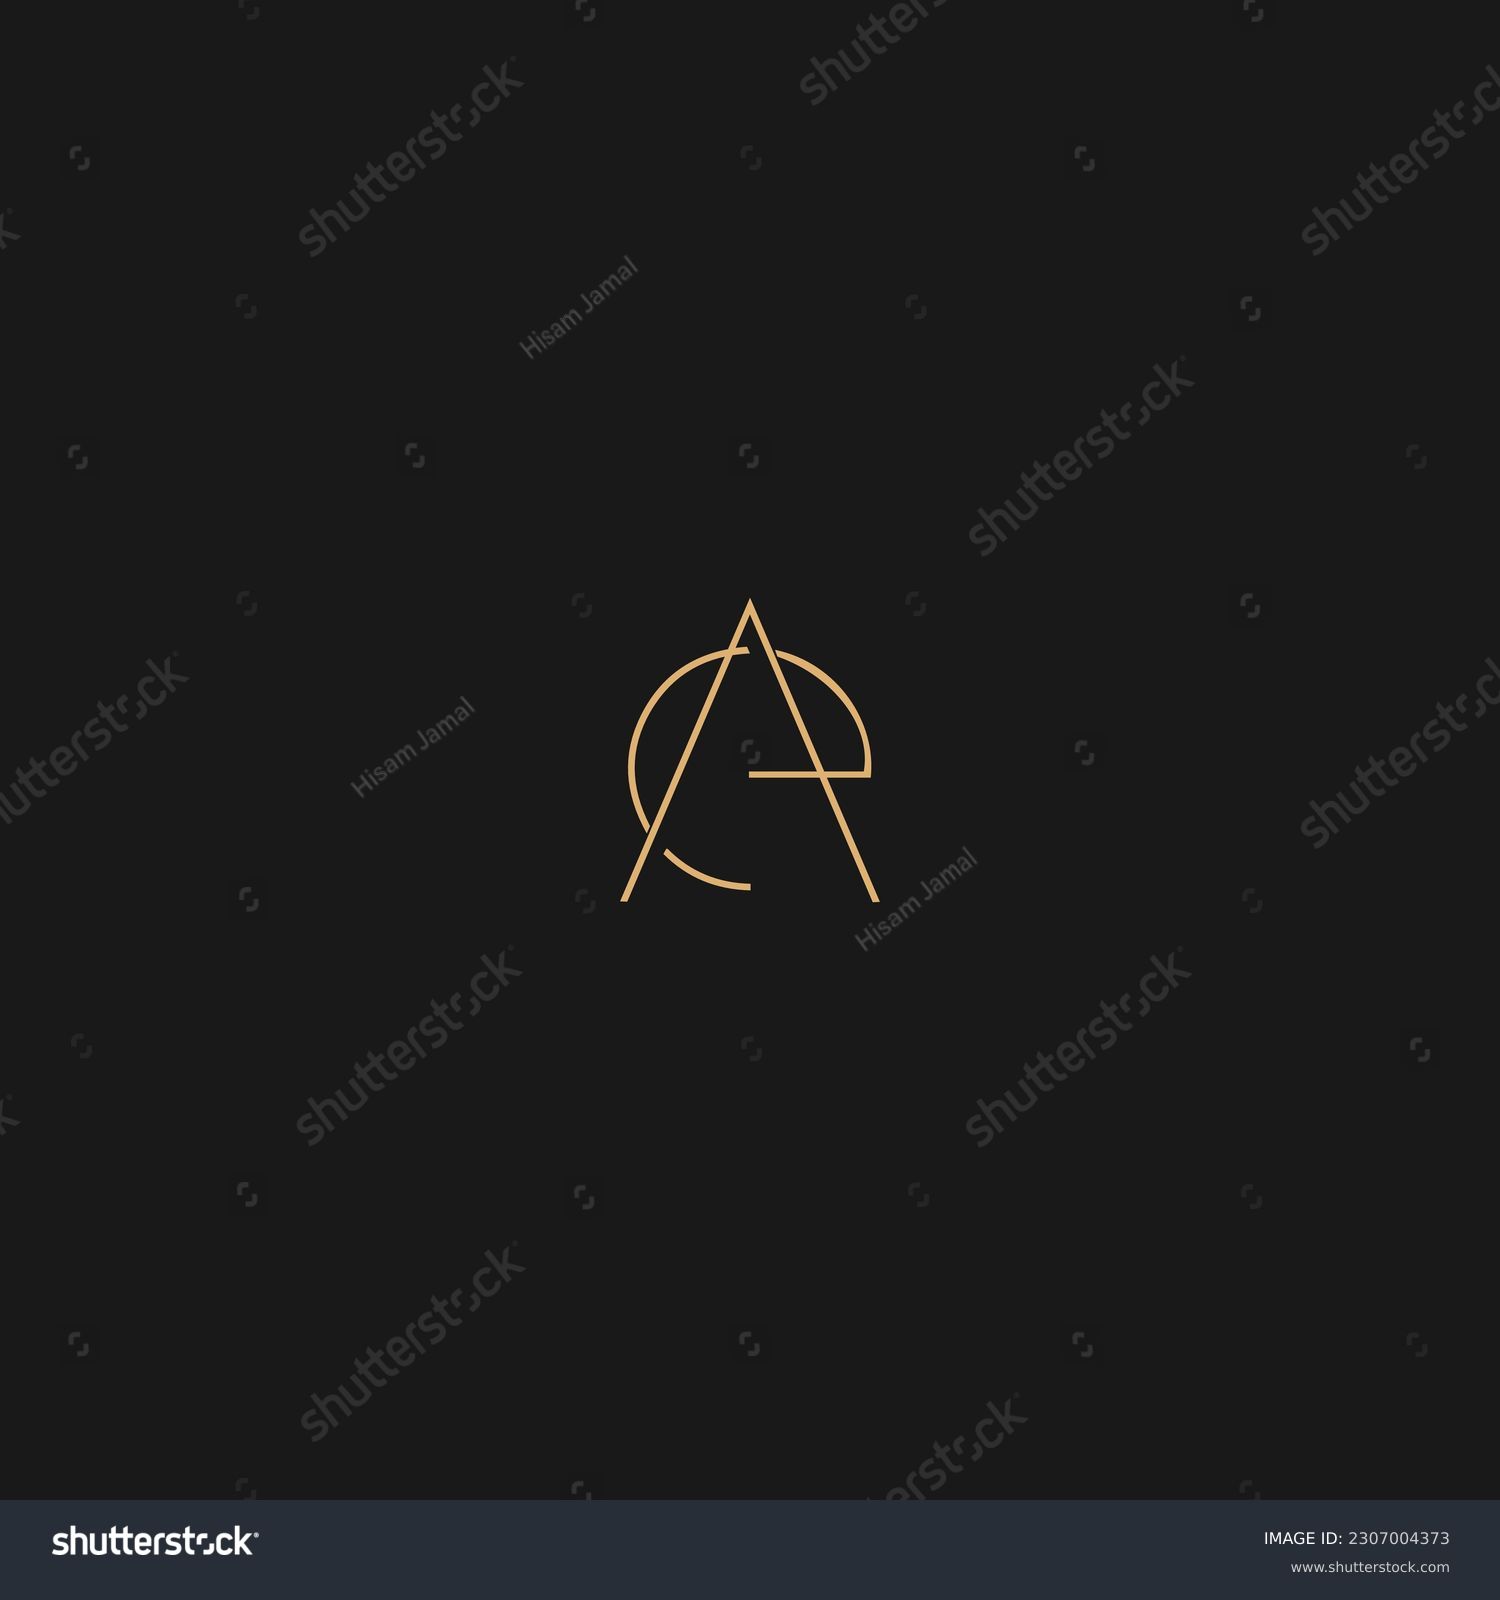 SVG of AE Letter Logo With Creative Modern Business Typography Vector Template. Creative Abstract Letter AE Logo Vector.
 svg